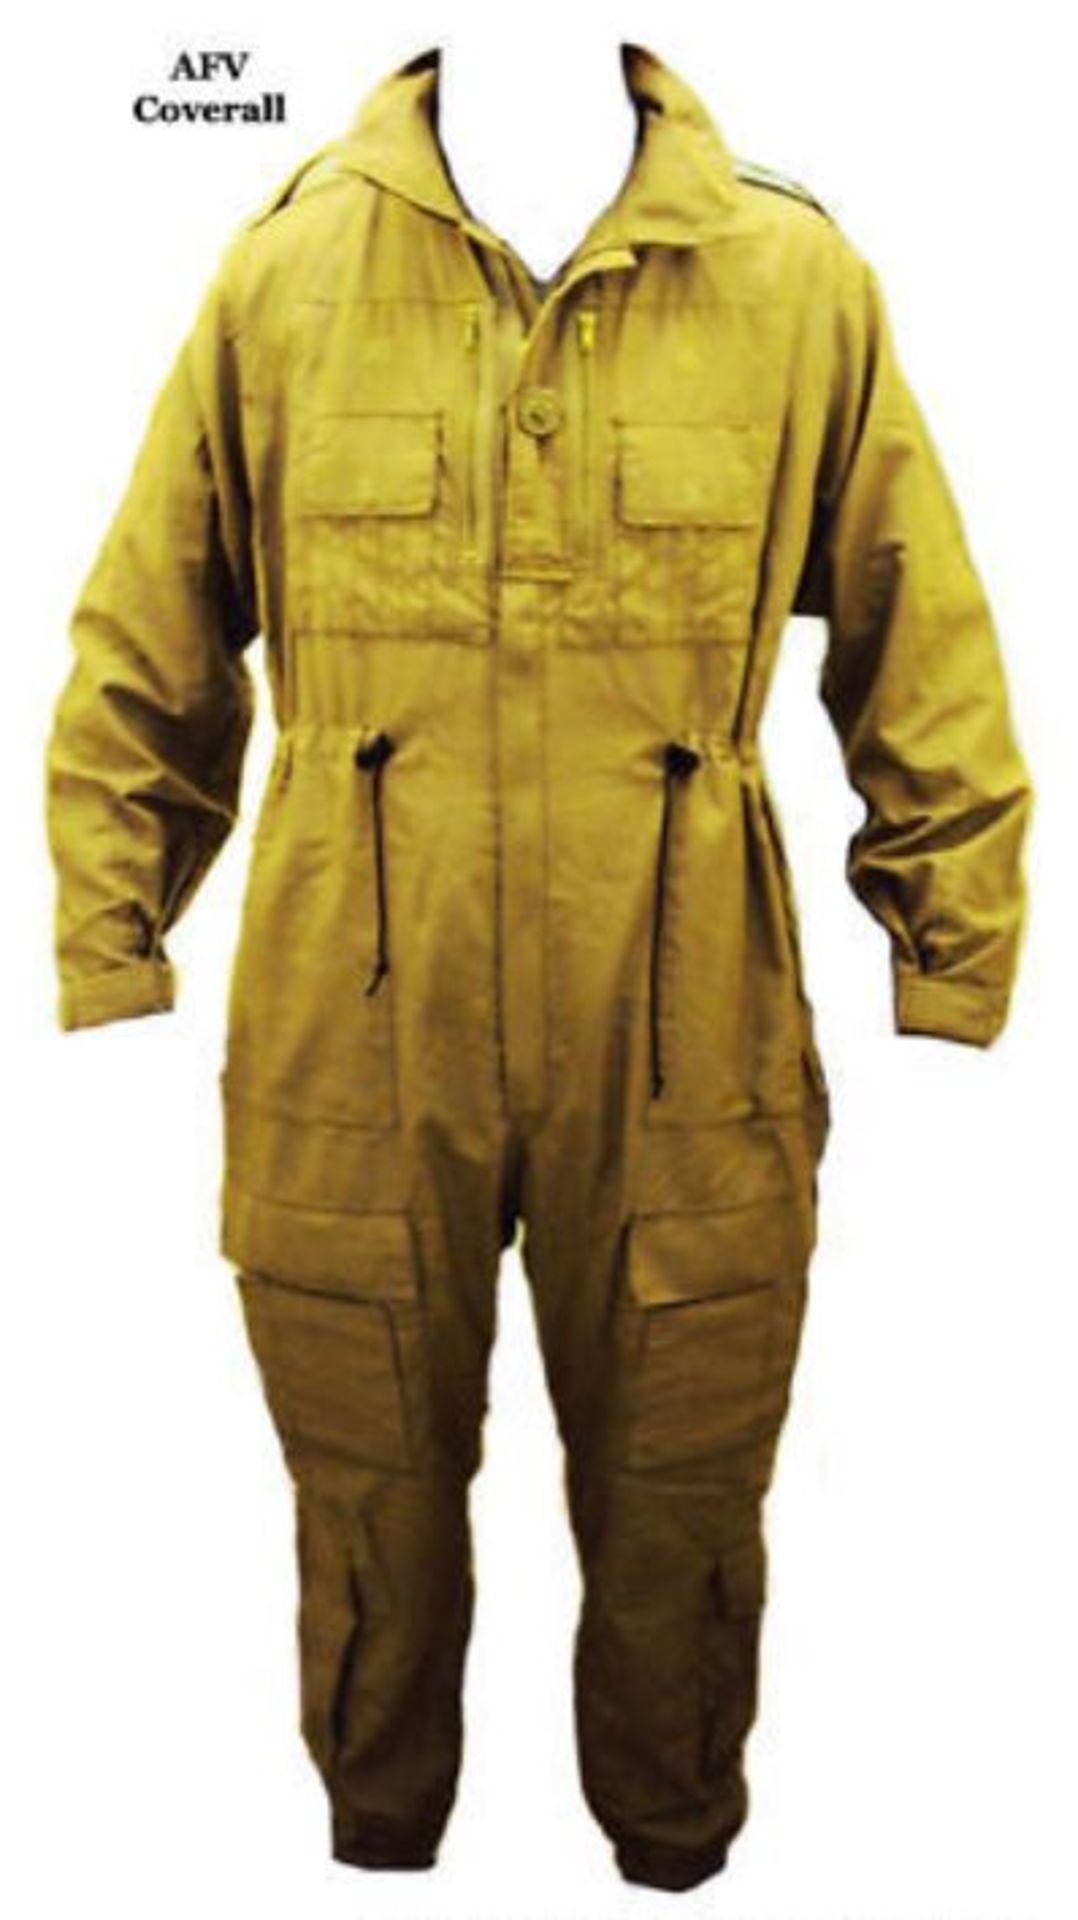 PACK OF 5 AFV Coveralls - Size 190/112, 180/112, 170/112 - Brand New